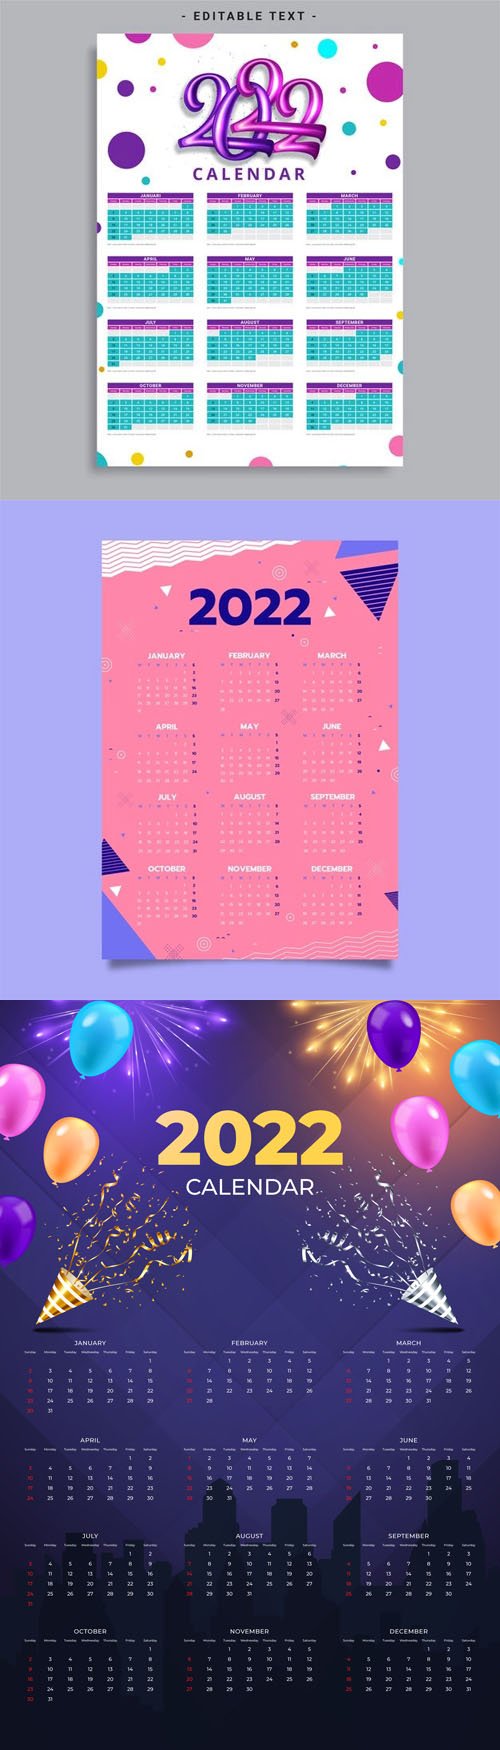 6 Realistic New Year 2022 Calendars Vector Templates